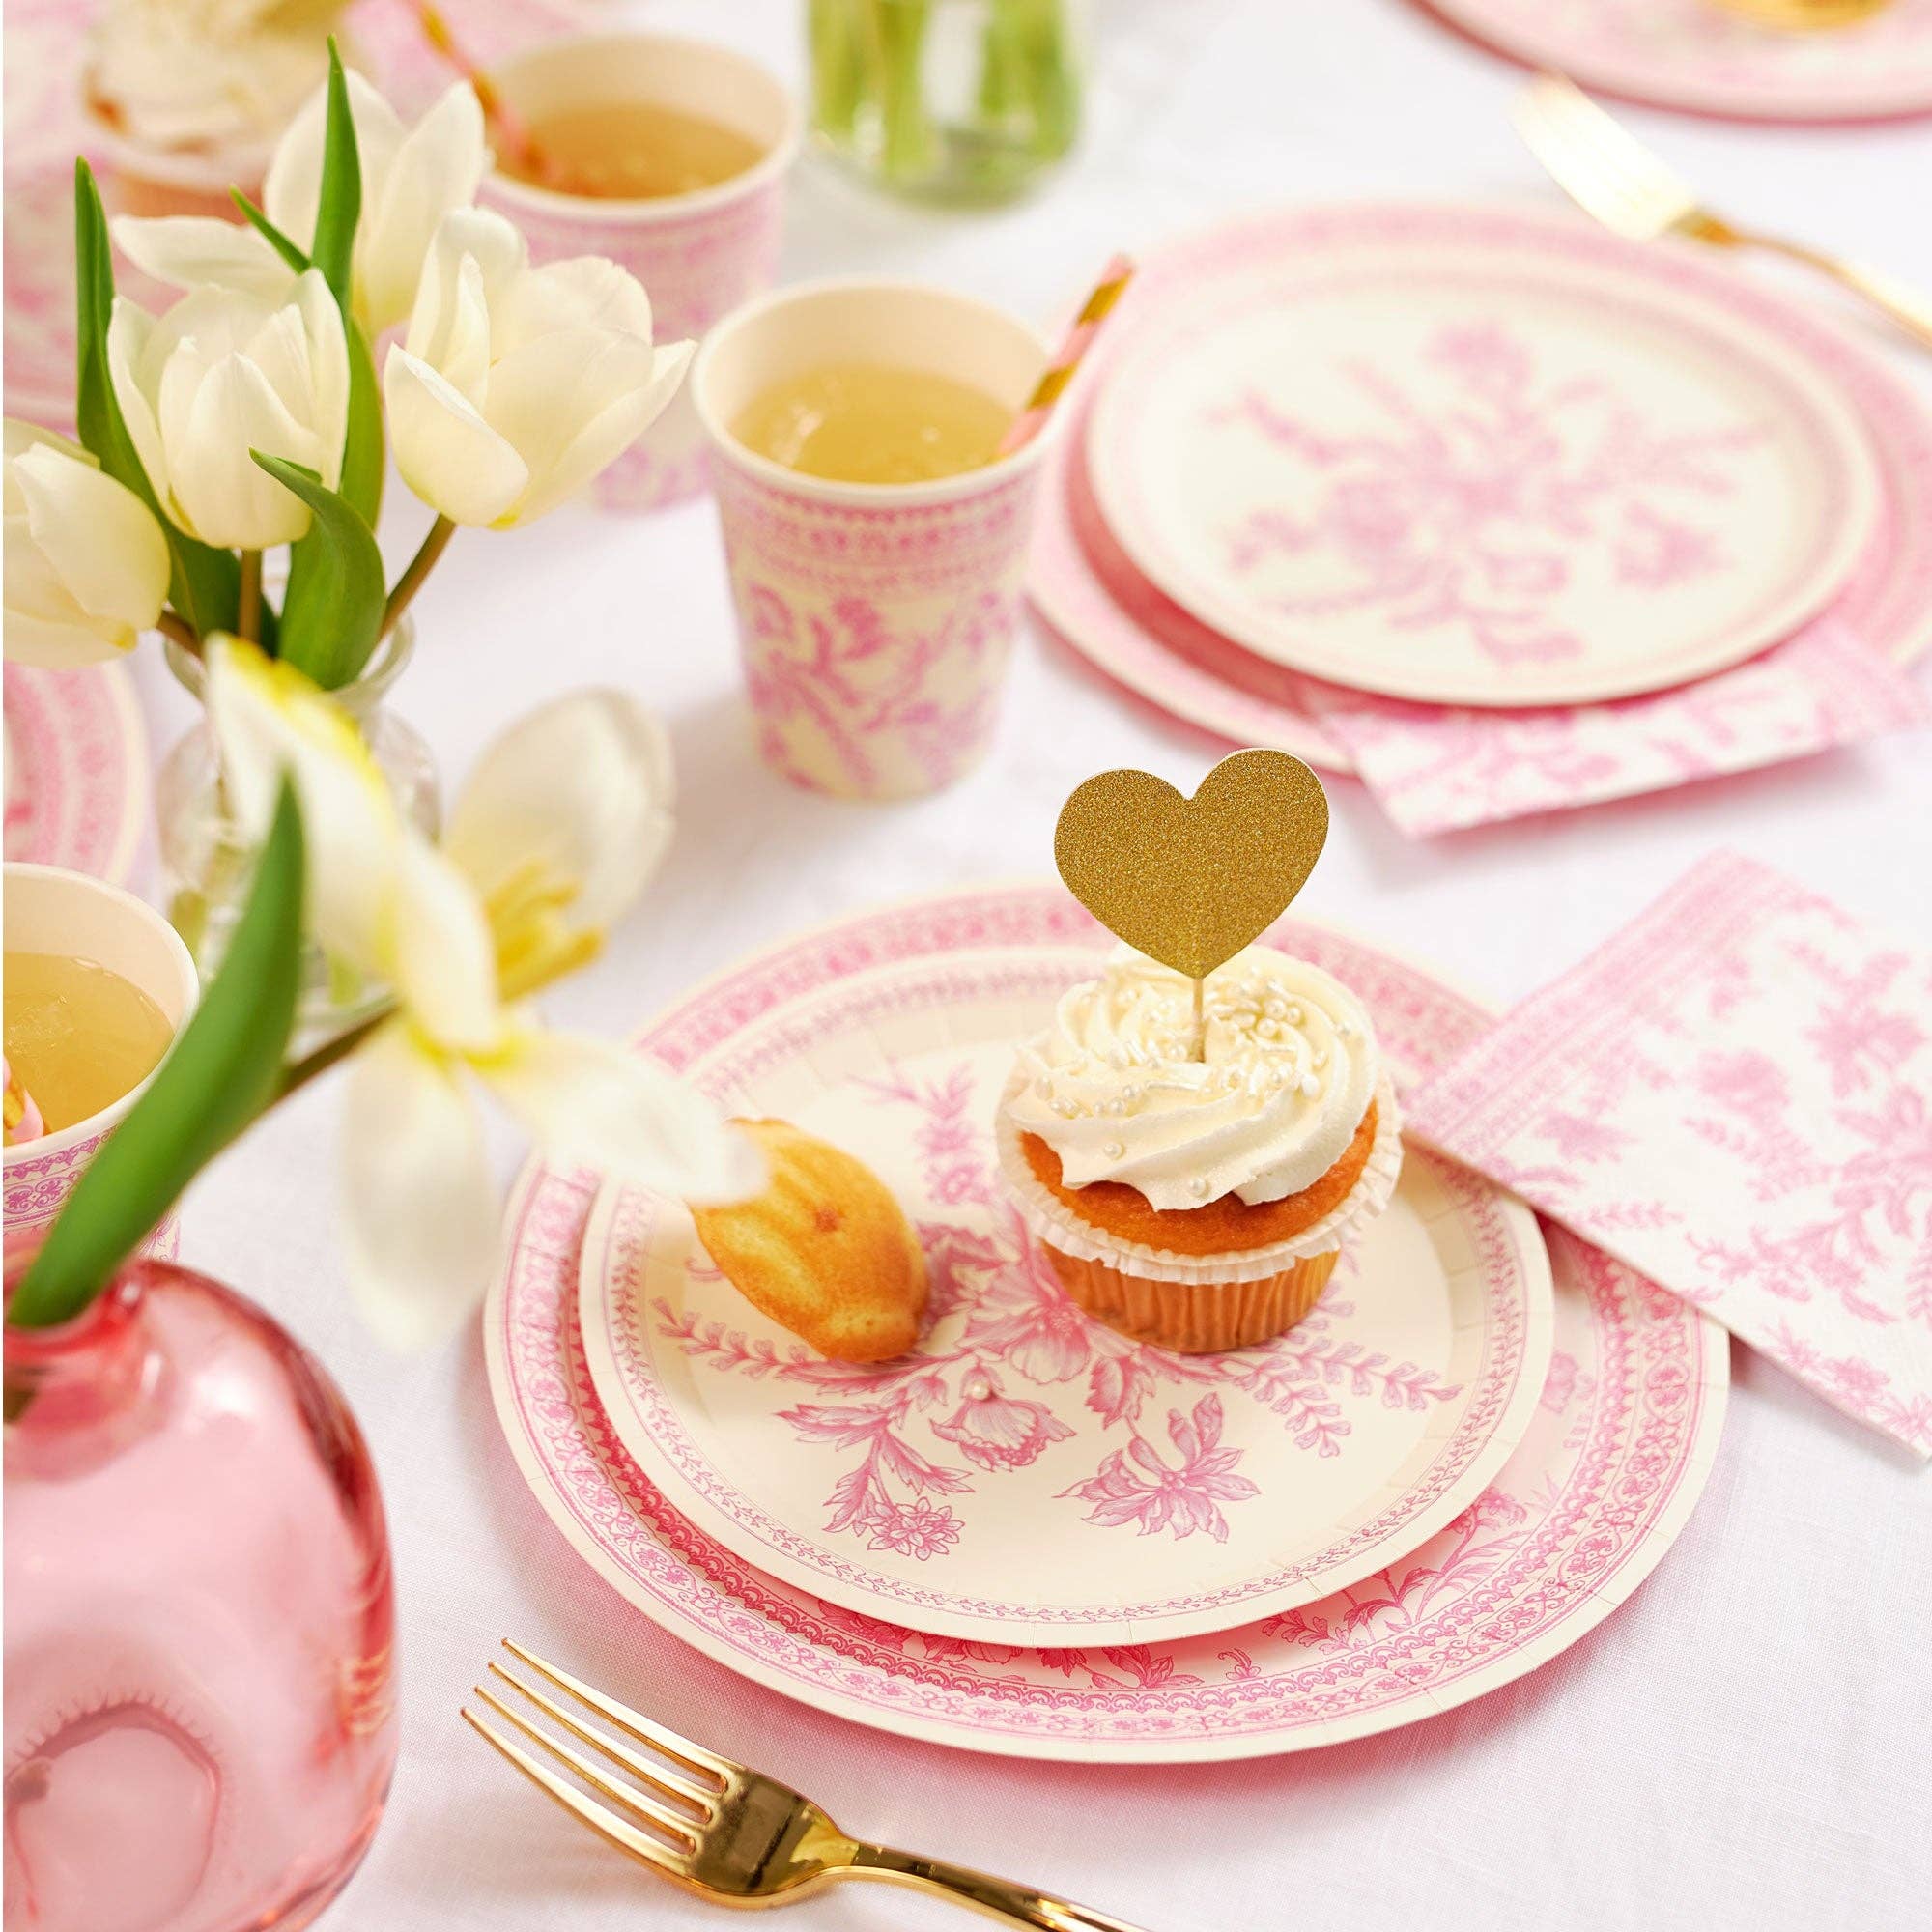 Pink Toile Small Plates